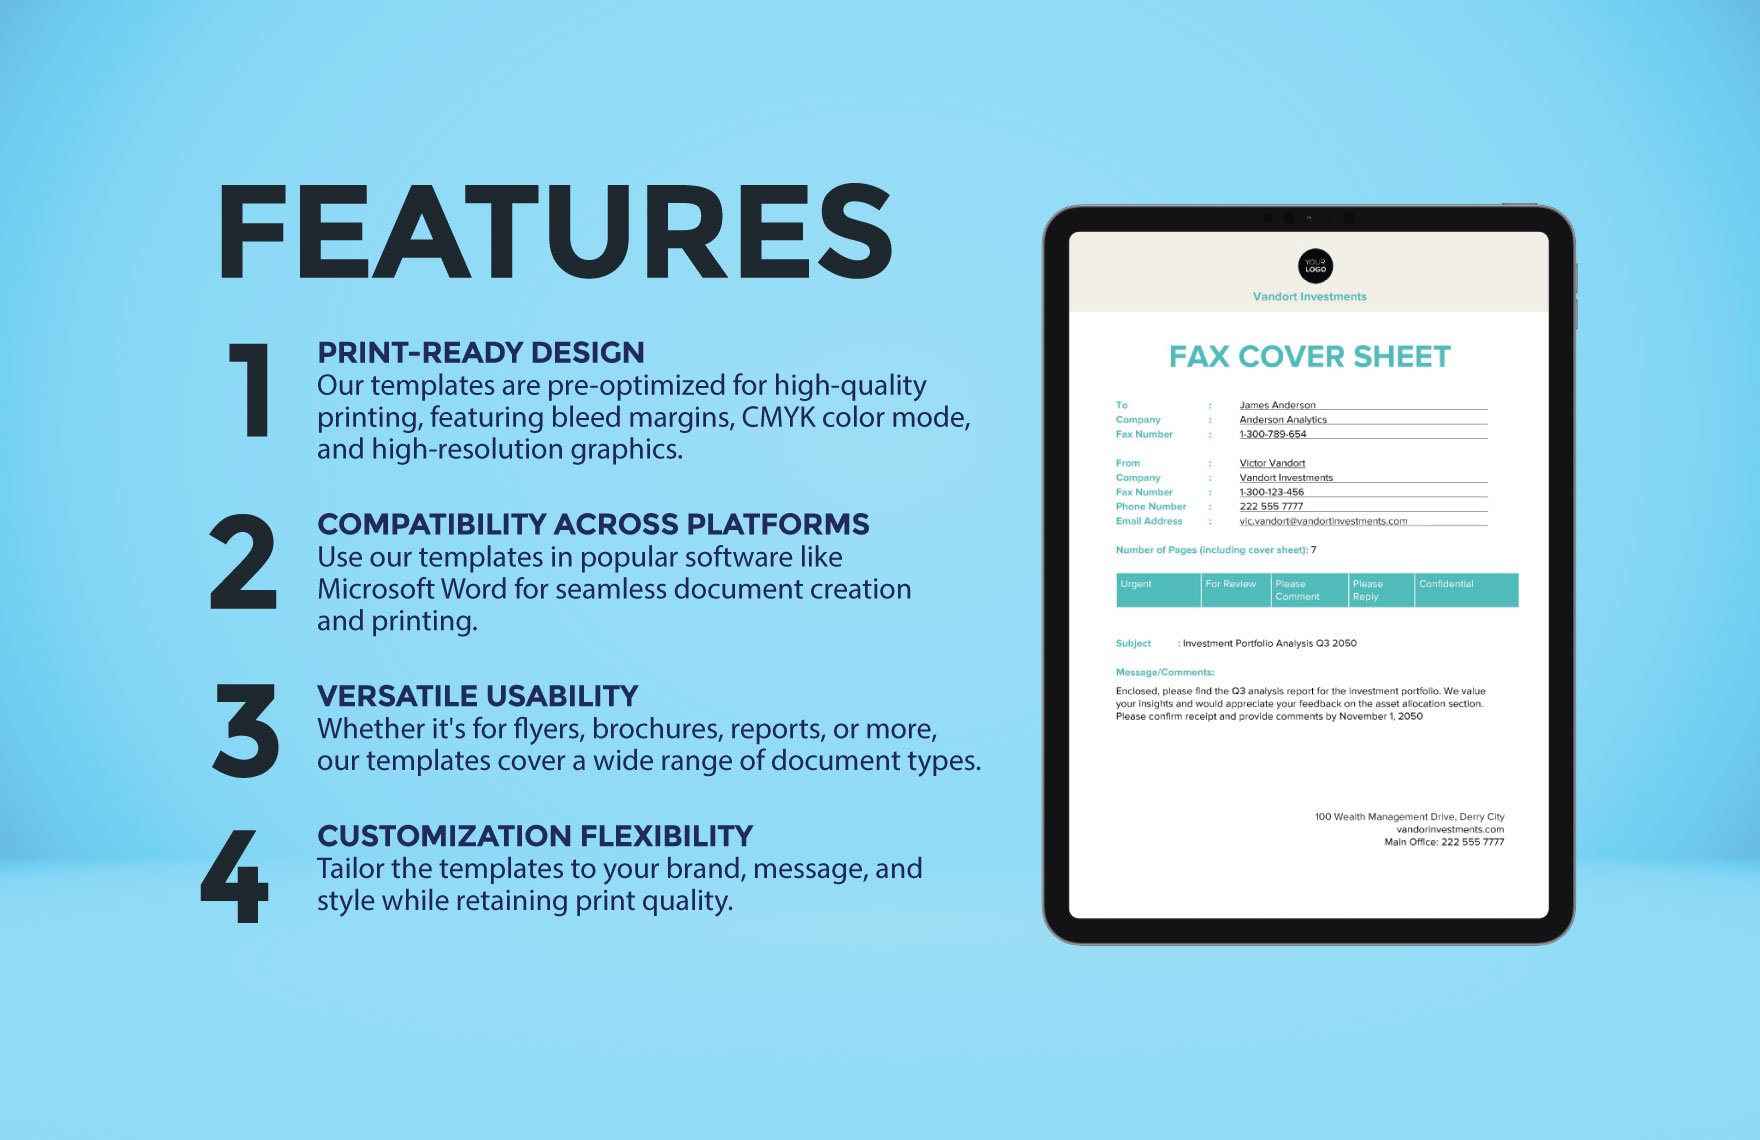 Printable Fax Cover Sheet Template